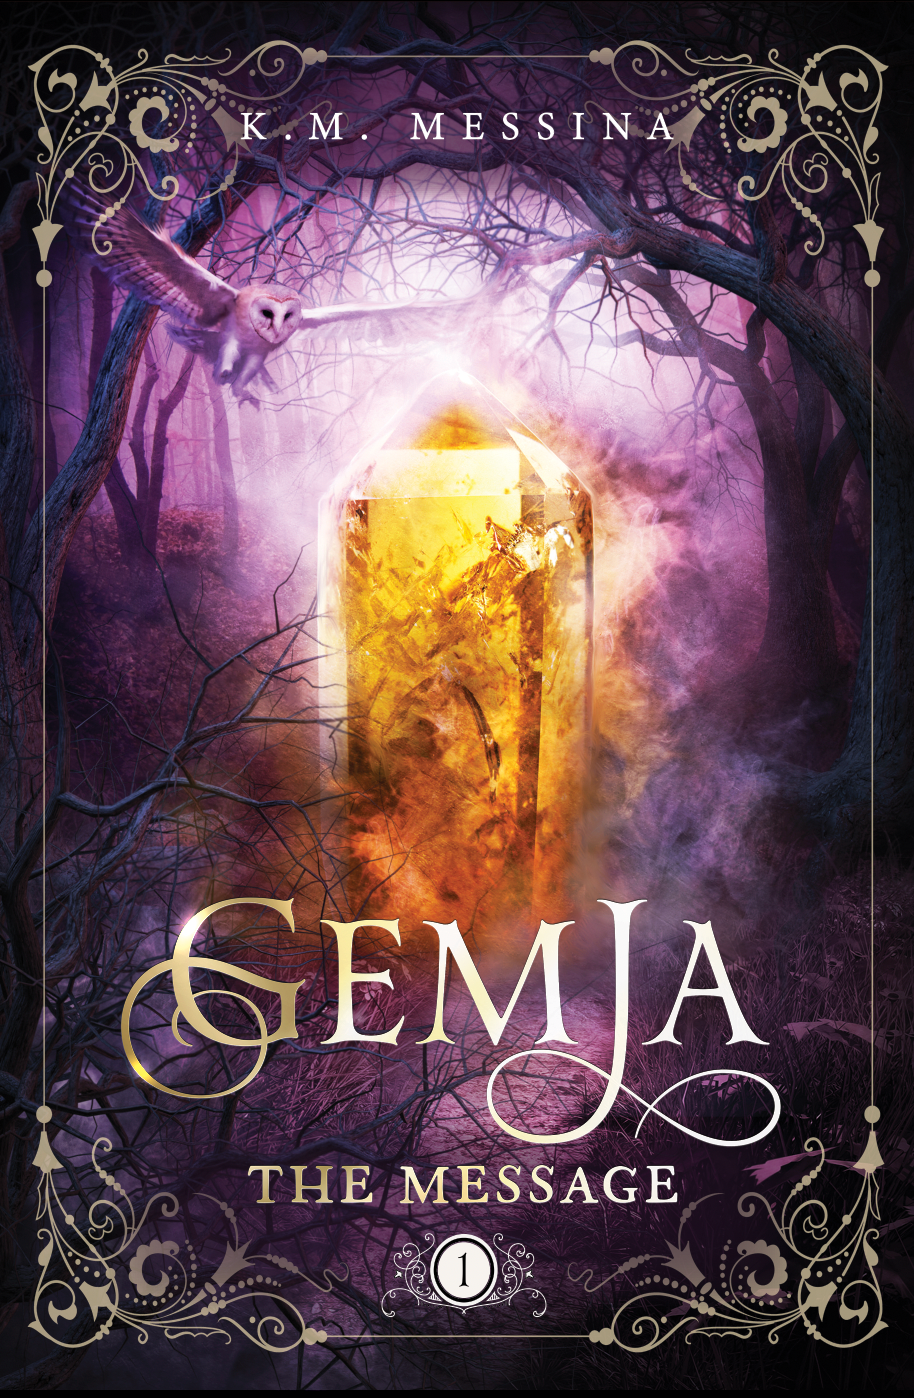 Book: Gemja - The Message